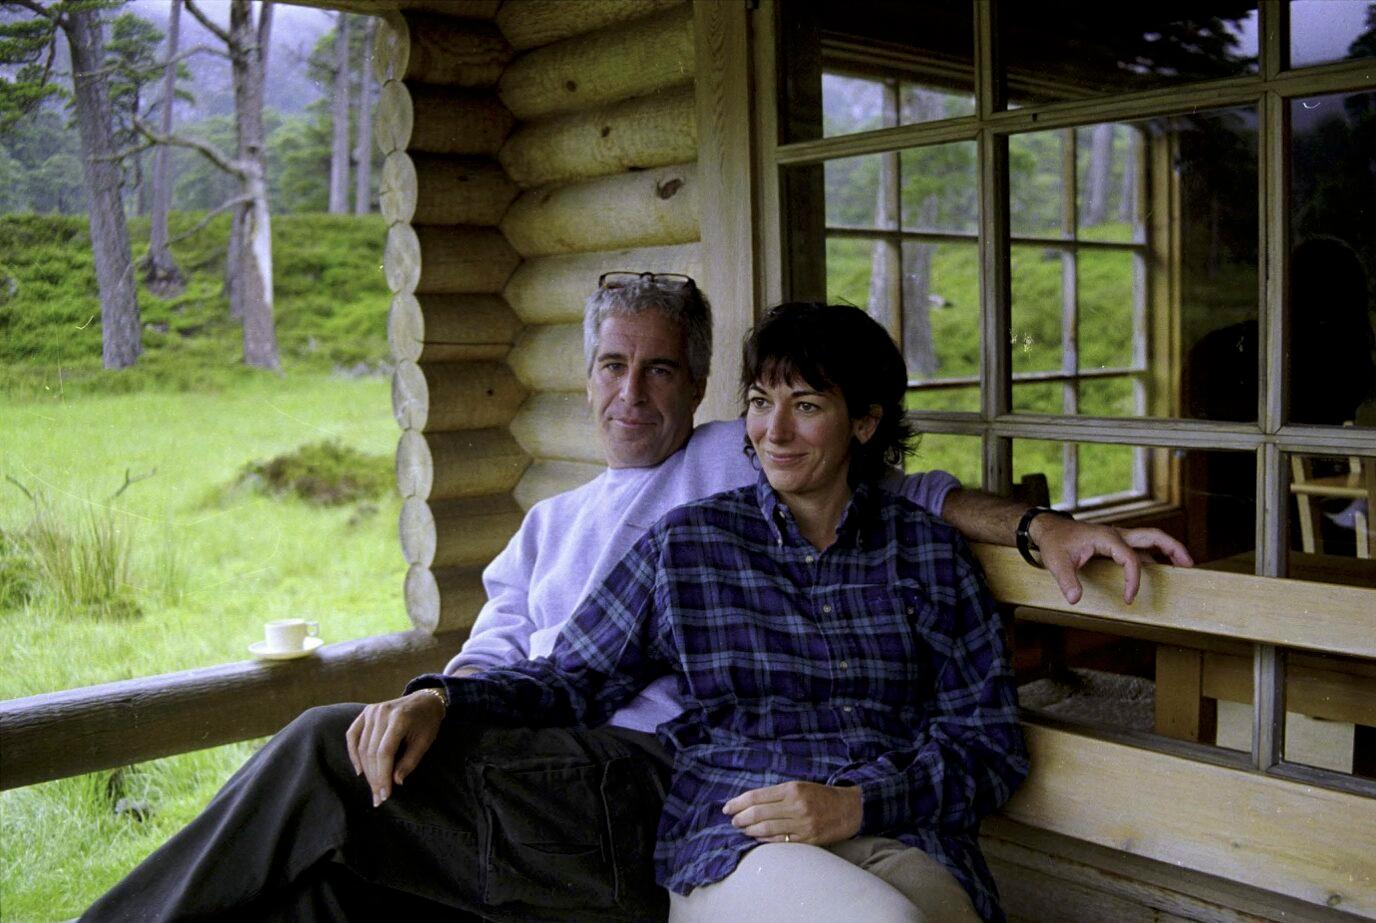 Pictured: Ghislaine Maxwell and Jeffrey Epstein relax at Queens Balmoral log cabin in newly-released photo